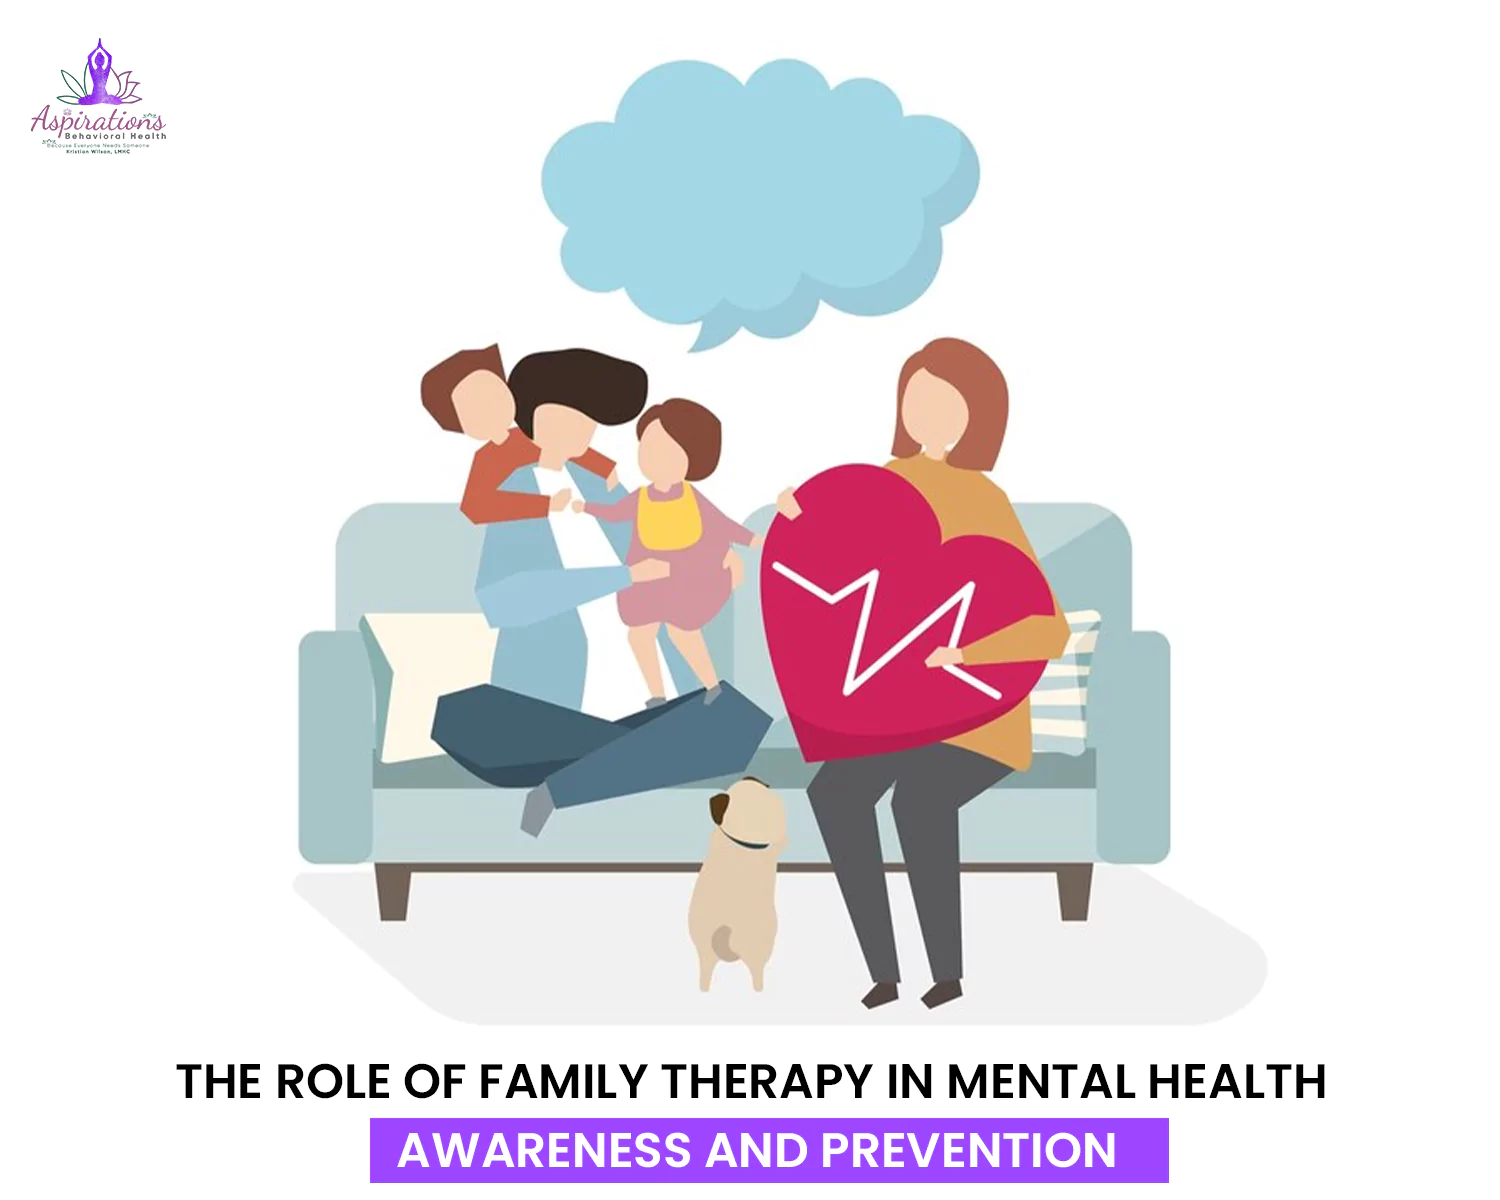 The Role of Family Therapy in Mental Health Awareness and Prevention